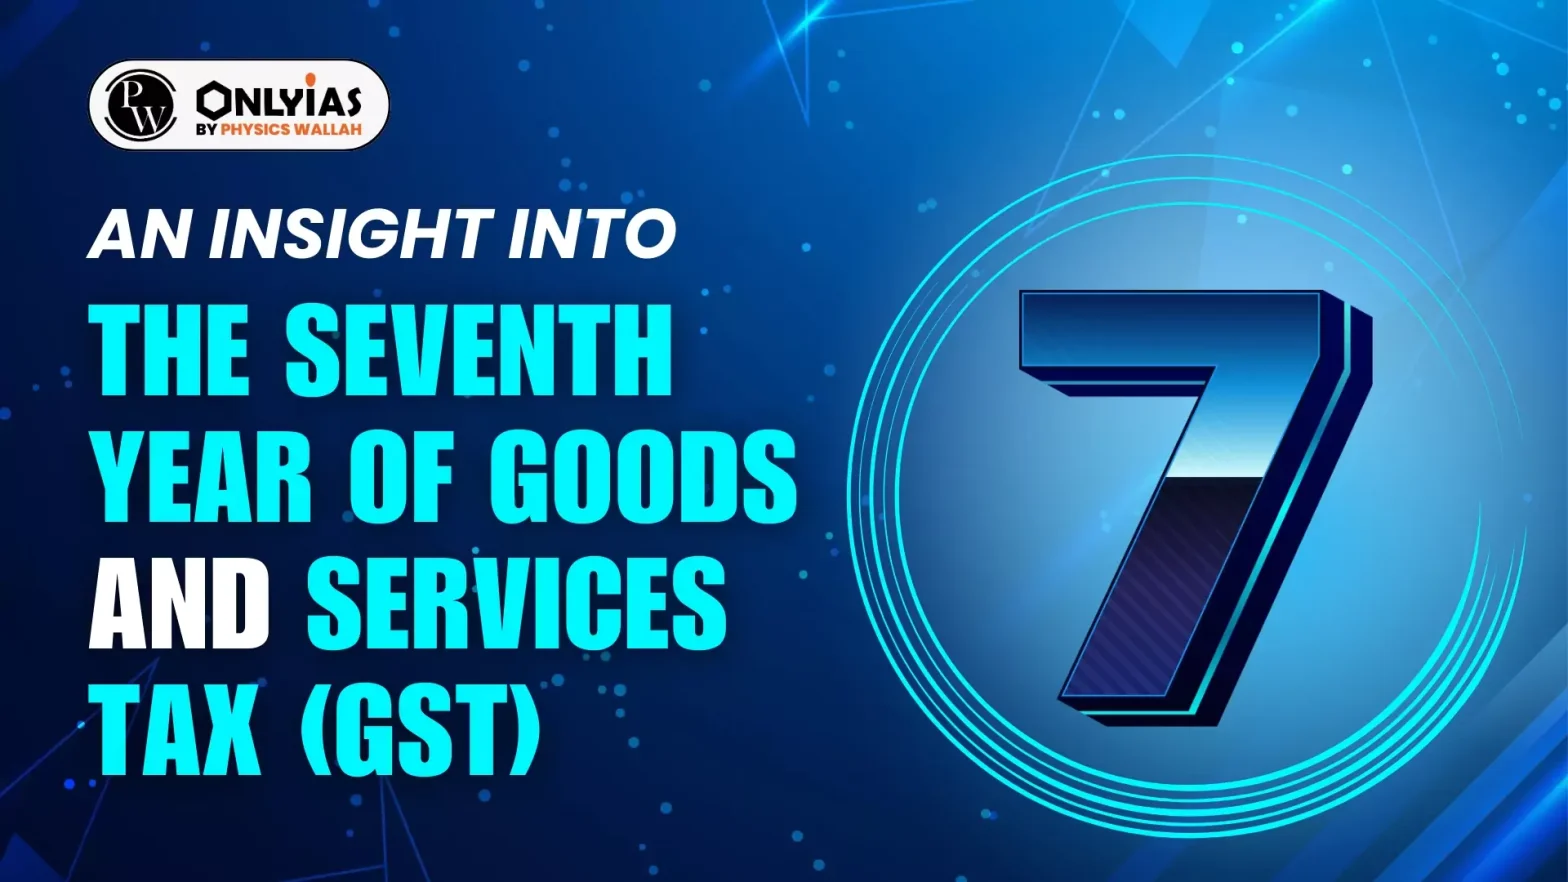 An Insight Into The Seventh Year Of Goods and Services Tax (GST)